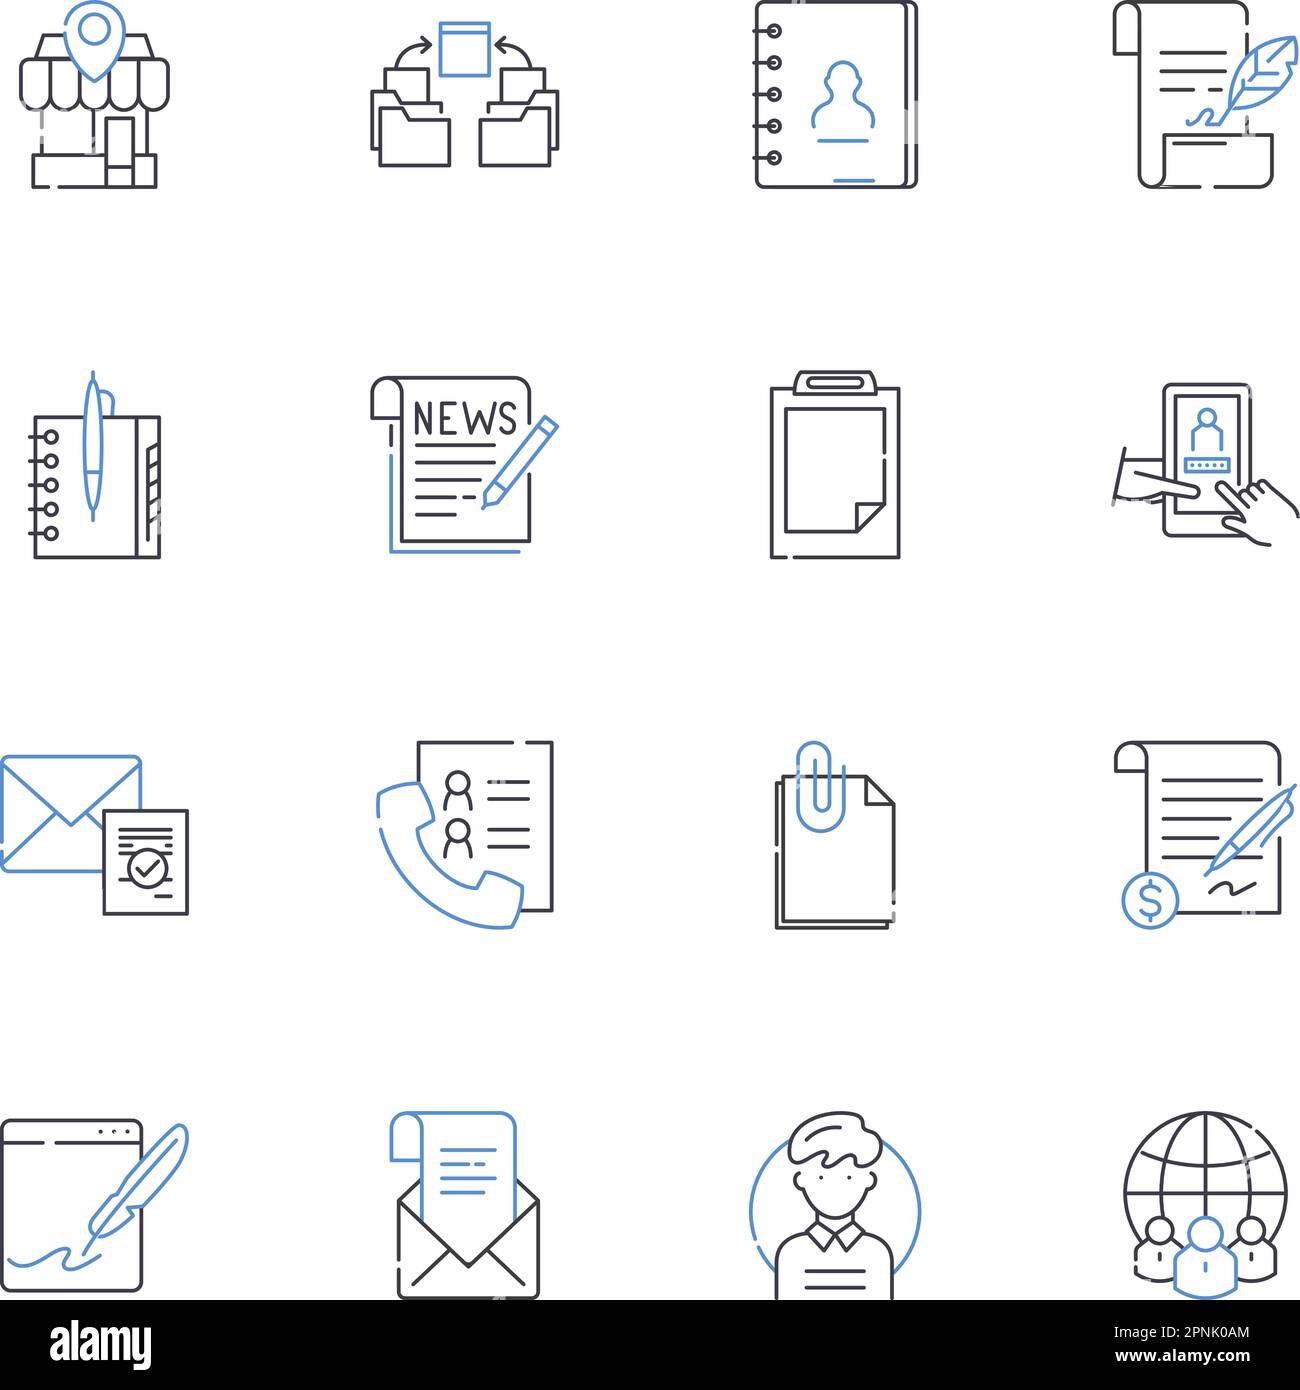 Wireless connection line icons collection. Wi-Fi, Bluetooth, Hotspot, Signal, Nerk, Router, Antenna vector and linear illustration. Modem,Transmitter Stock Vector